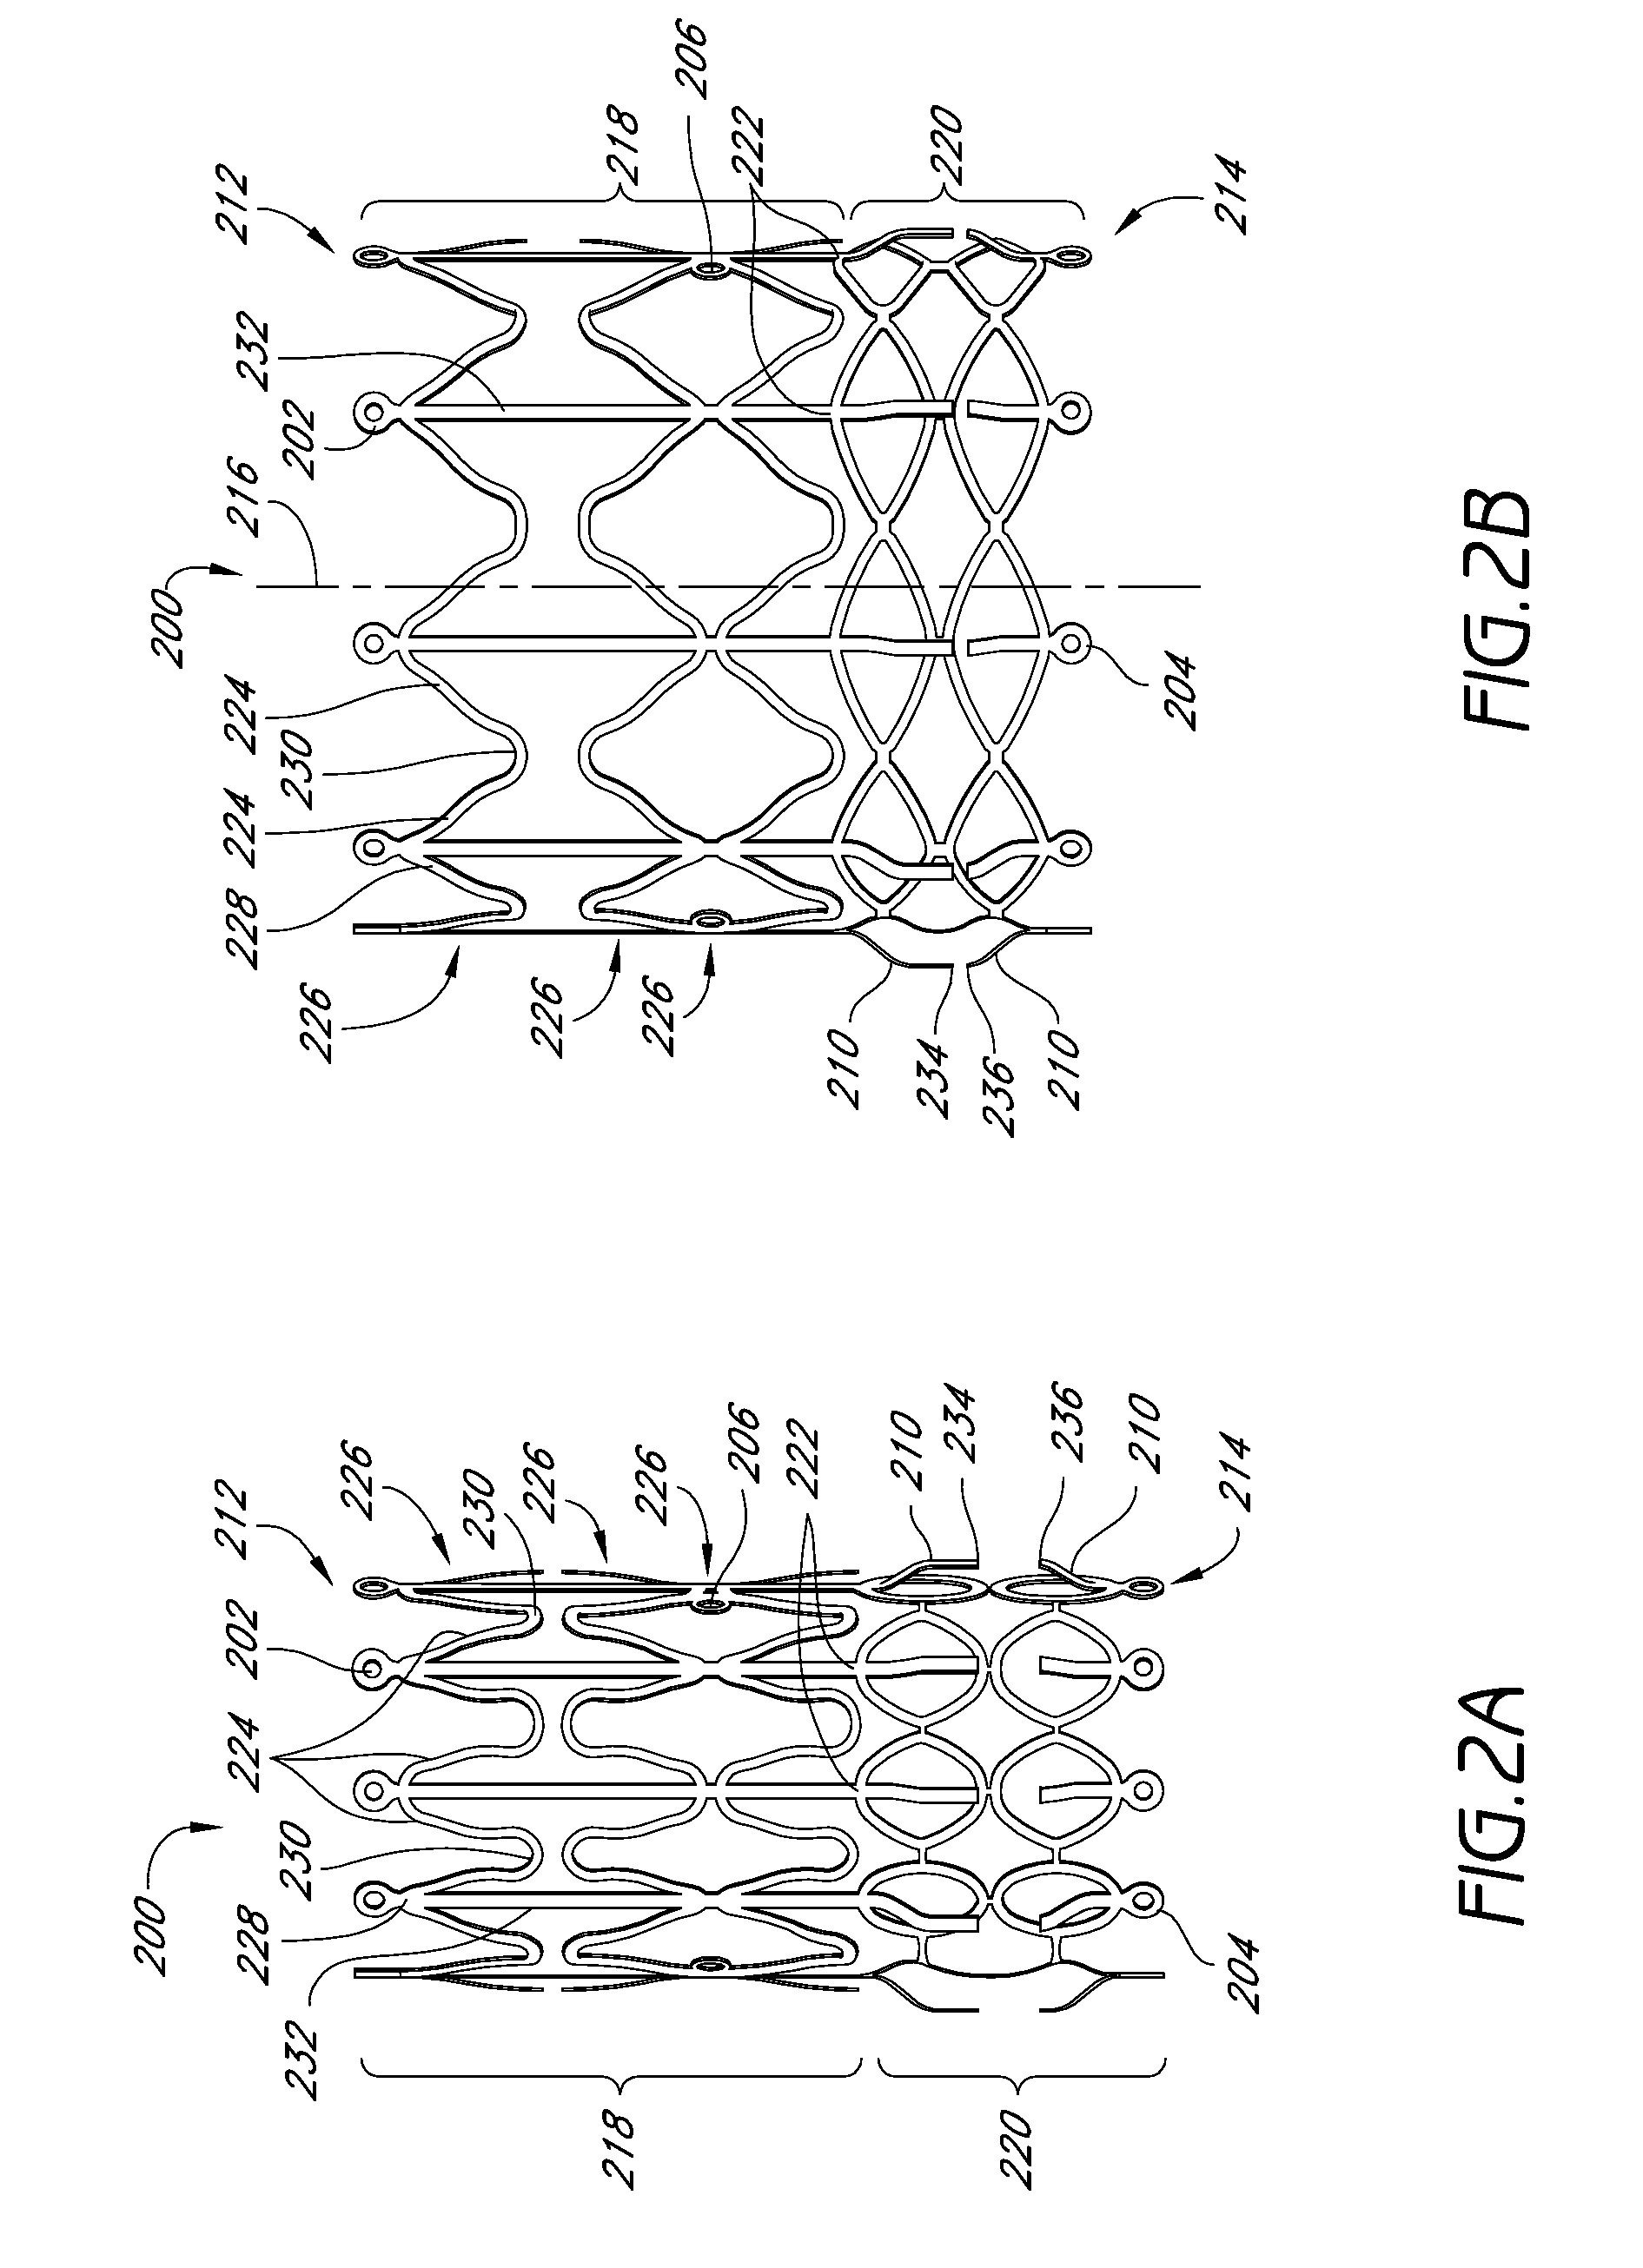 Delivery system for vascular implant